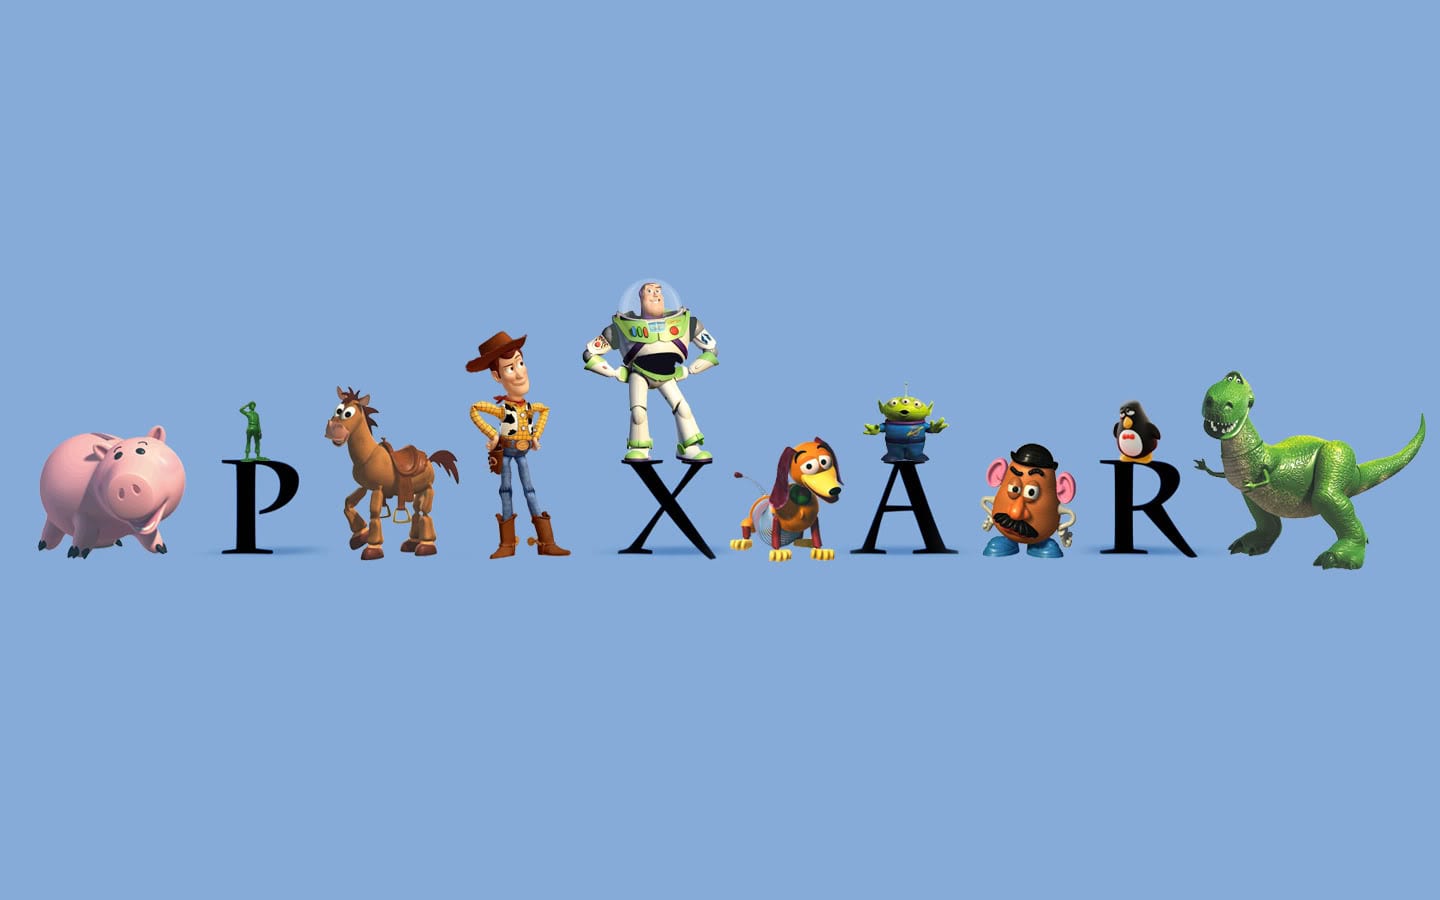 The Pixar logo is visible with various Pixar characters surrounding it.